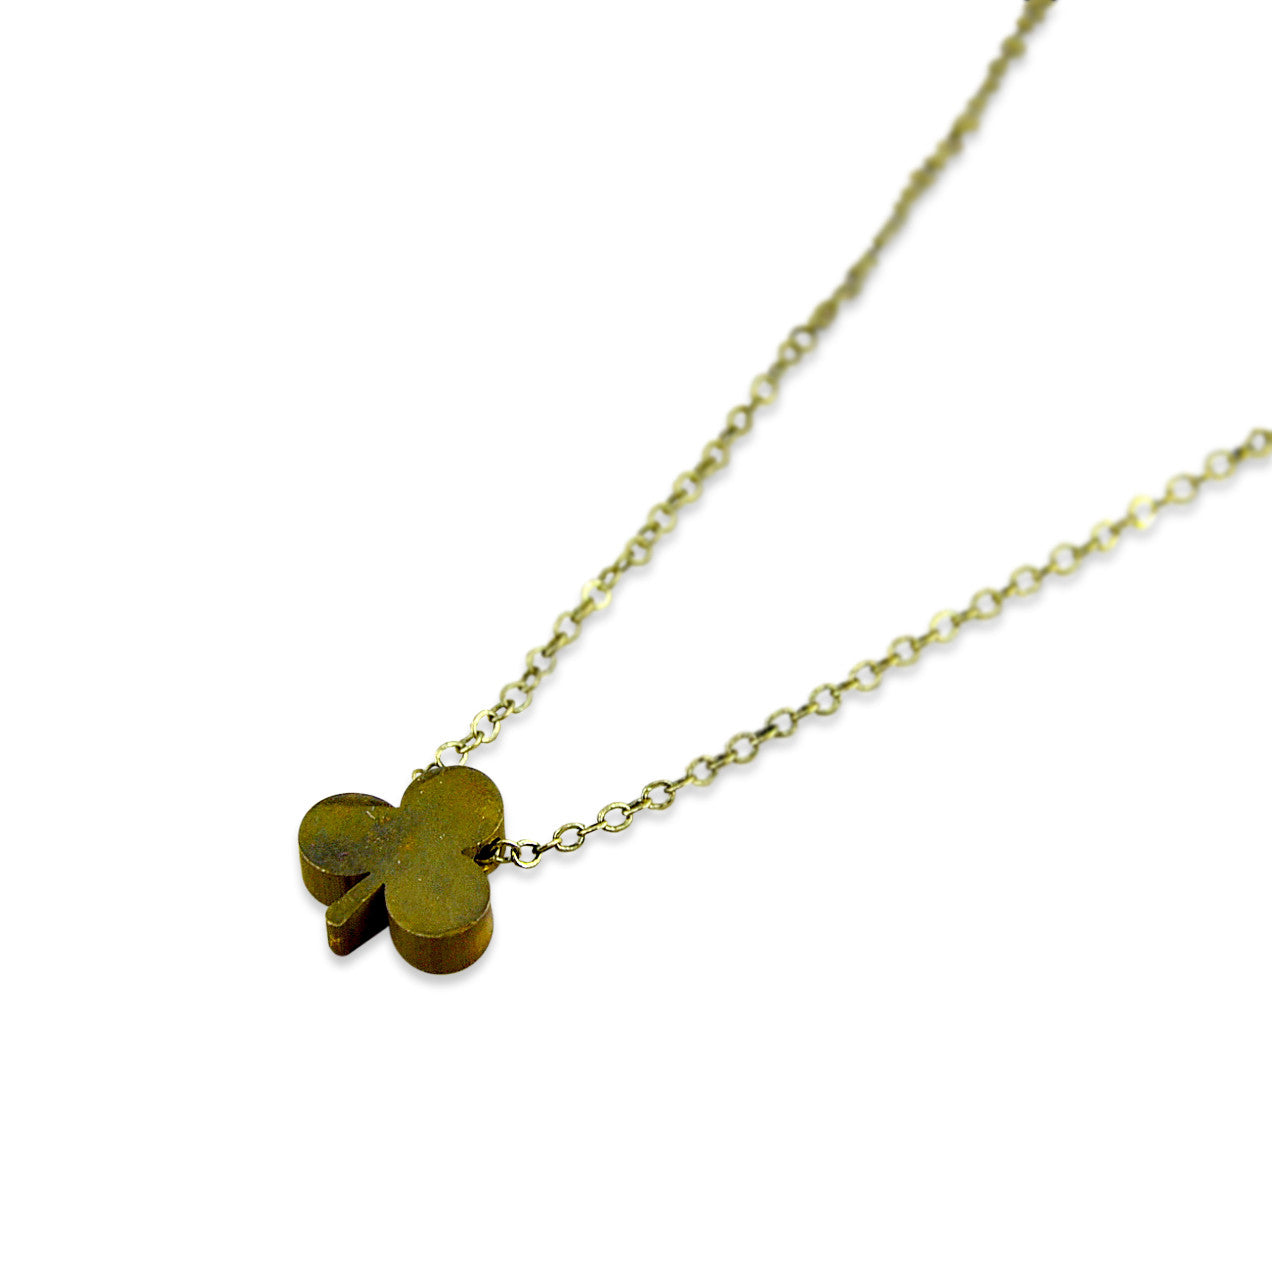 Tiny Lucky Clover Necklace - Gwen Delicious Jewelry Designs